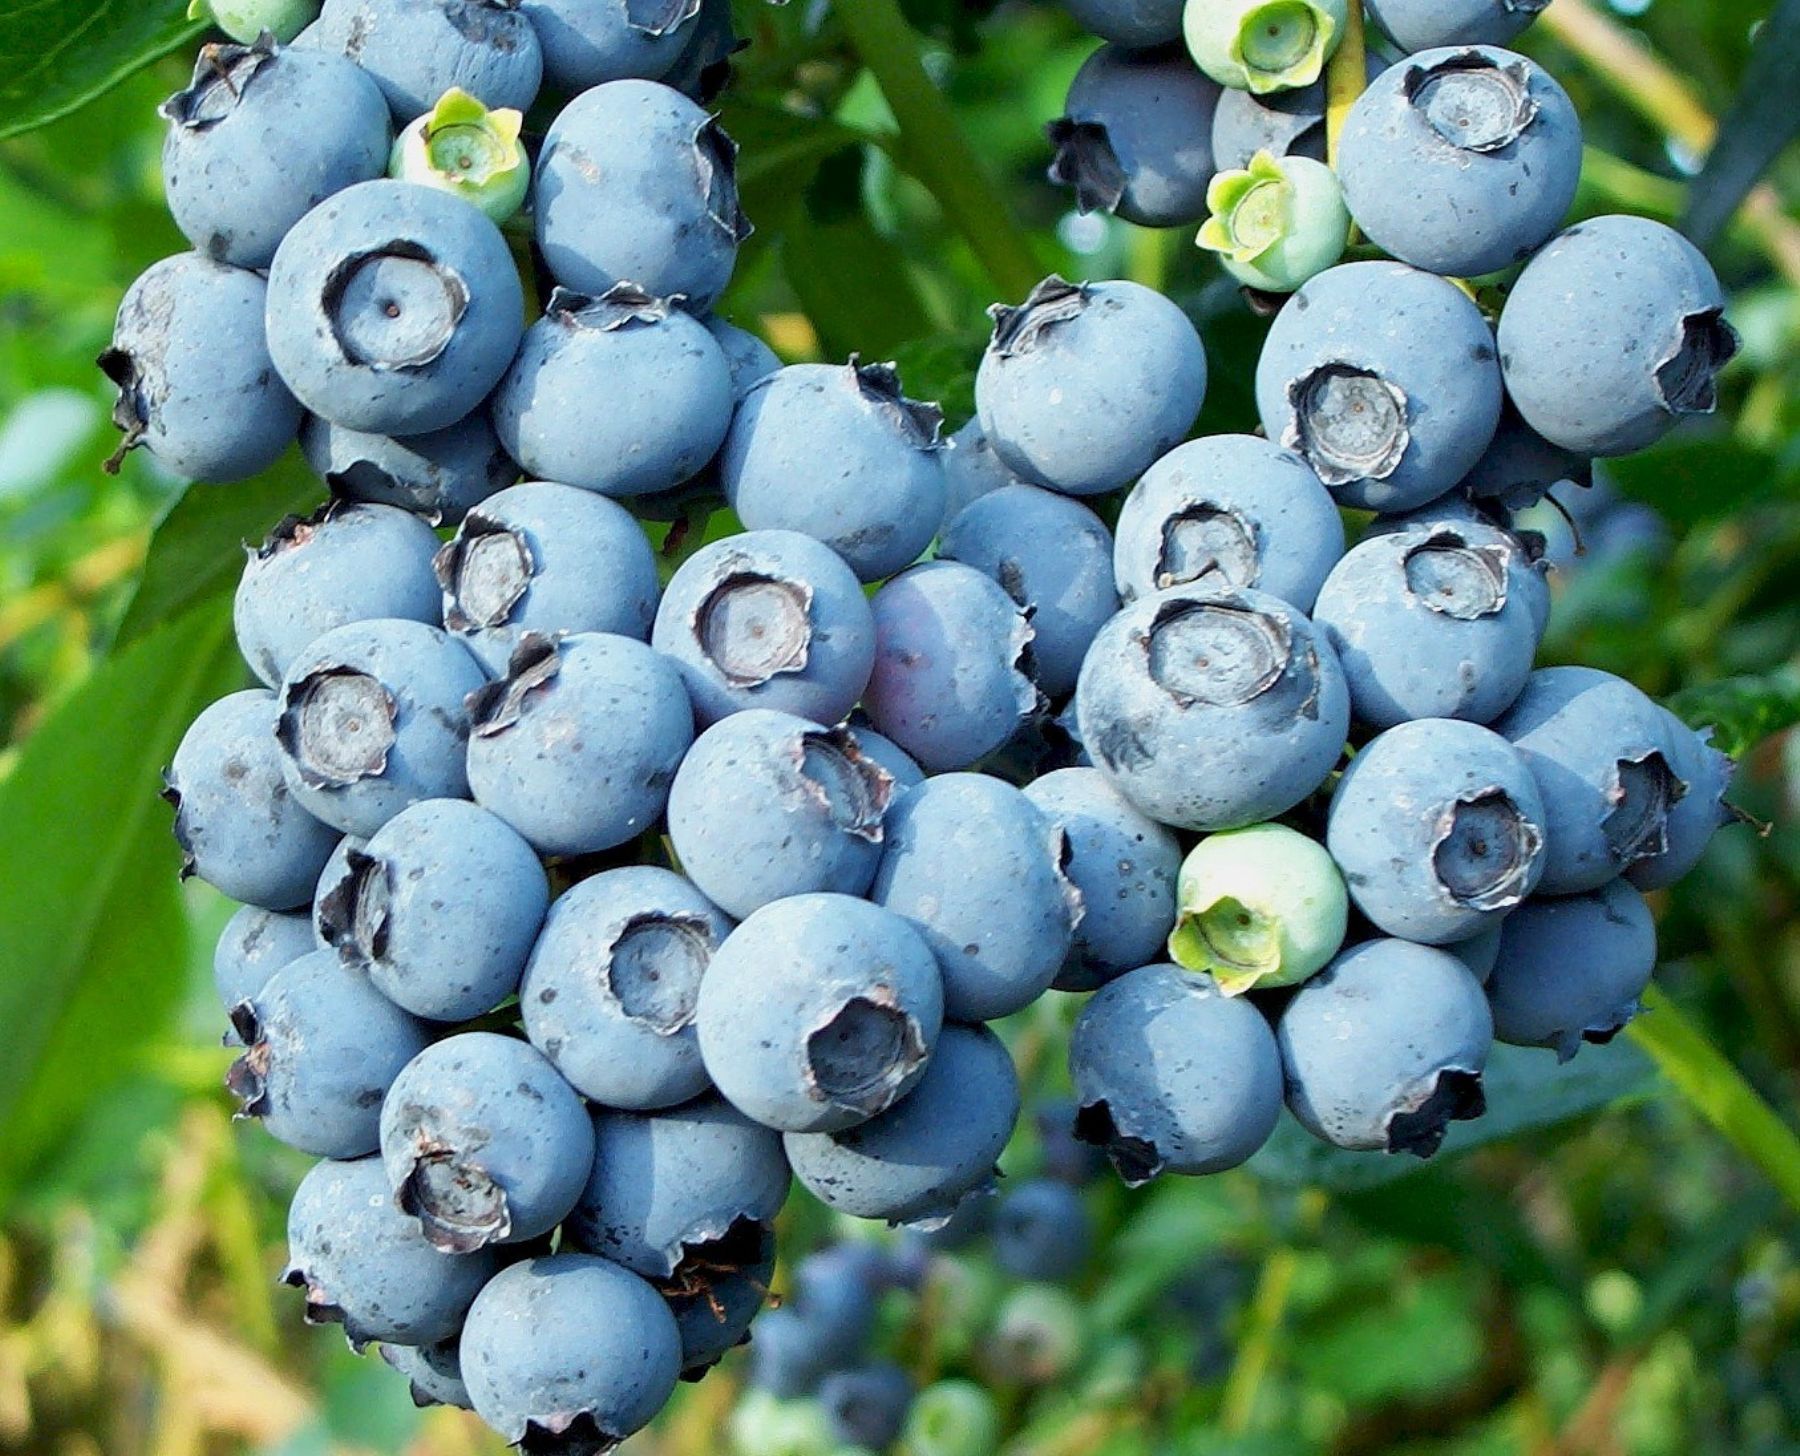 Peruvian blueberry exports reached US$ 10 million in 2013.